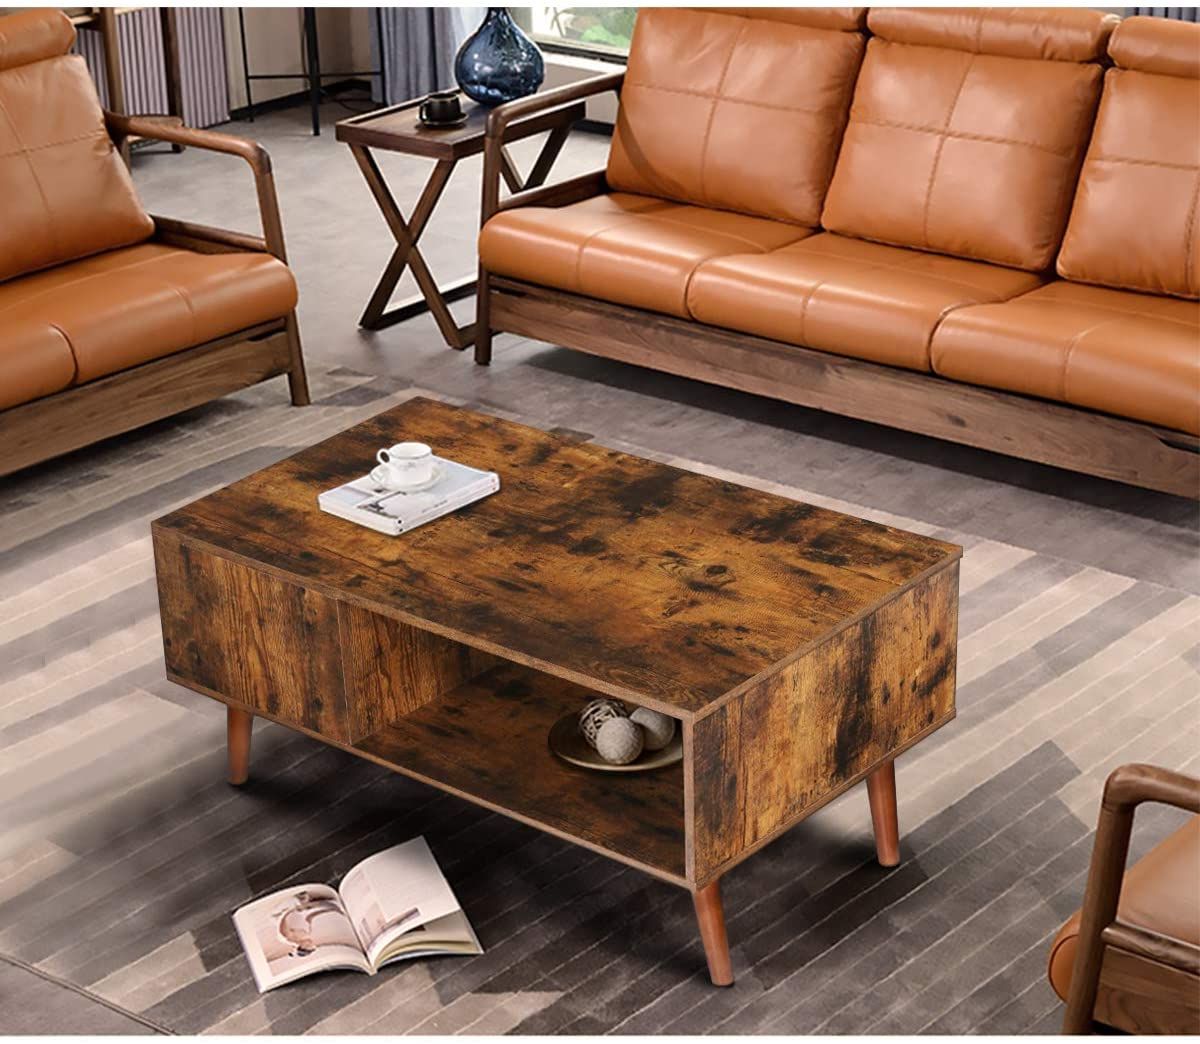 Top 10 Best Coffee Tables With Storage In 2020 – Reviews Throughout Favorite Espresso Wood Storage Console Tables (View 7 of 10)